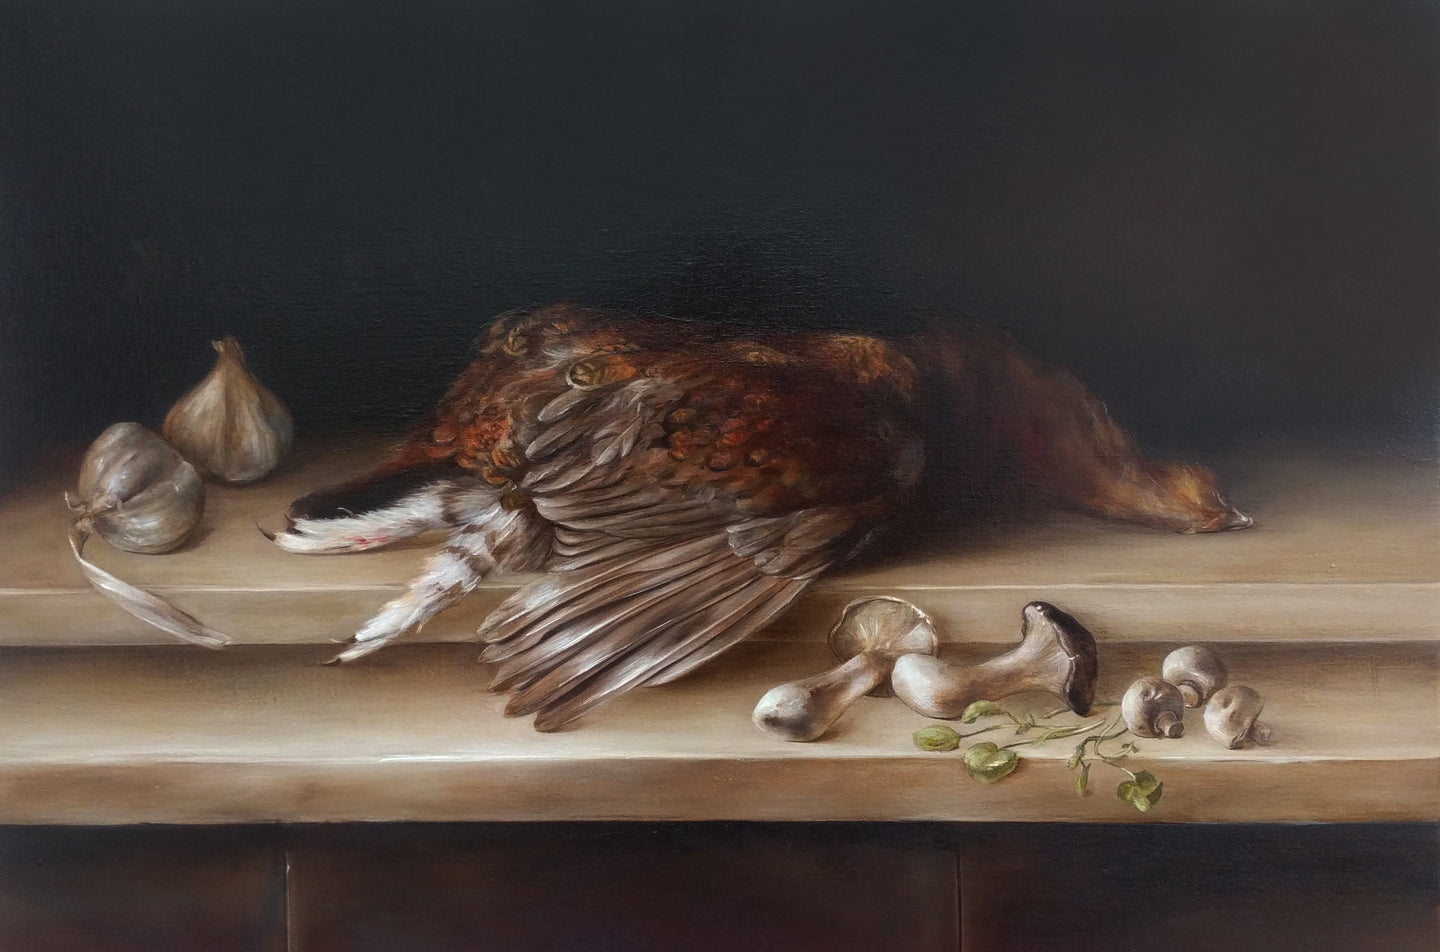 Original oil painting: a recipe for Grouse with garlic, mushrooms and watercress